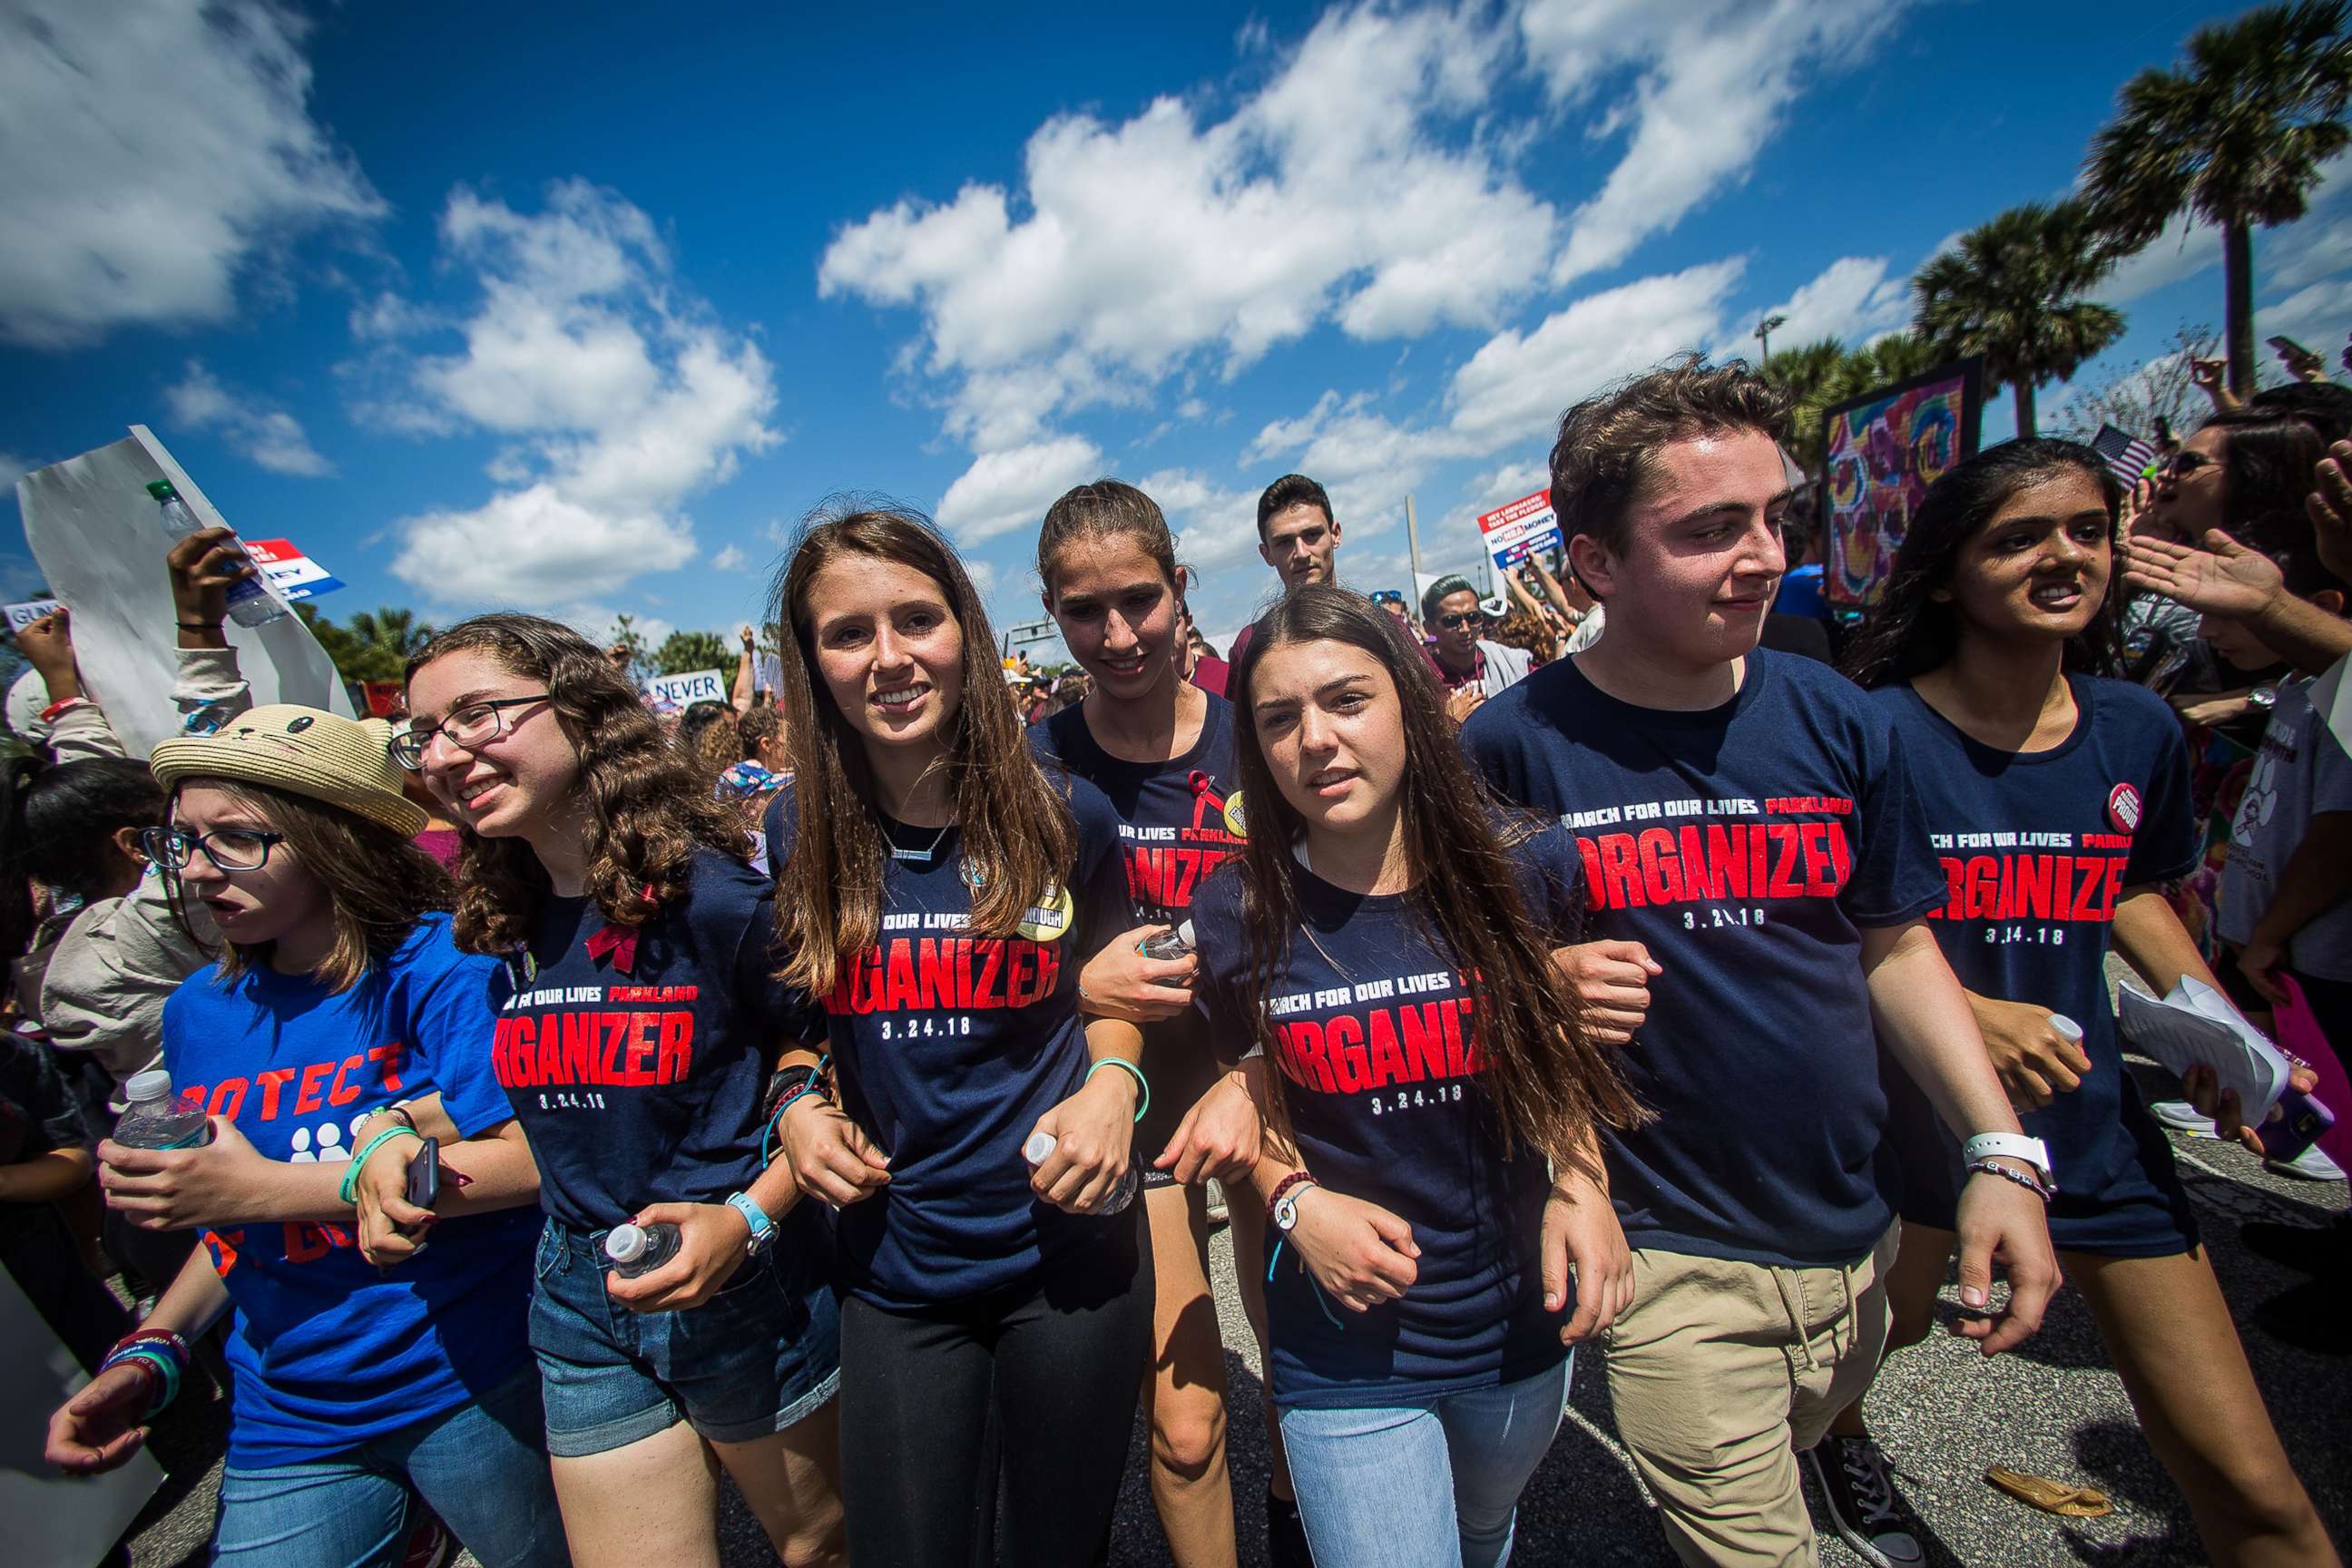 PHOTO: Marjory Stoneman Douglas High School students march from Pine Trails Park to Marjory Stoneman Douglas during the March for Our Lives protest in Parkland, Fla., March 24, 2018.